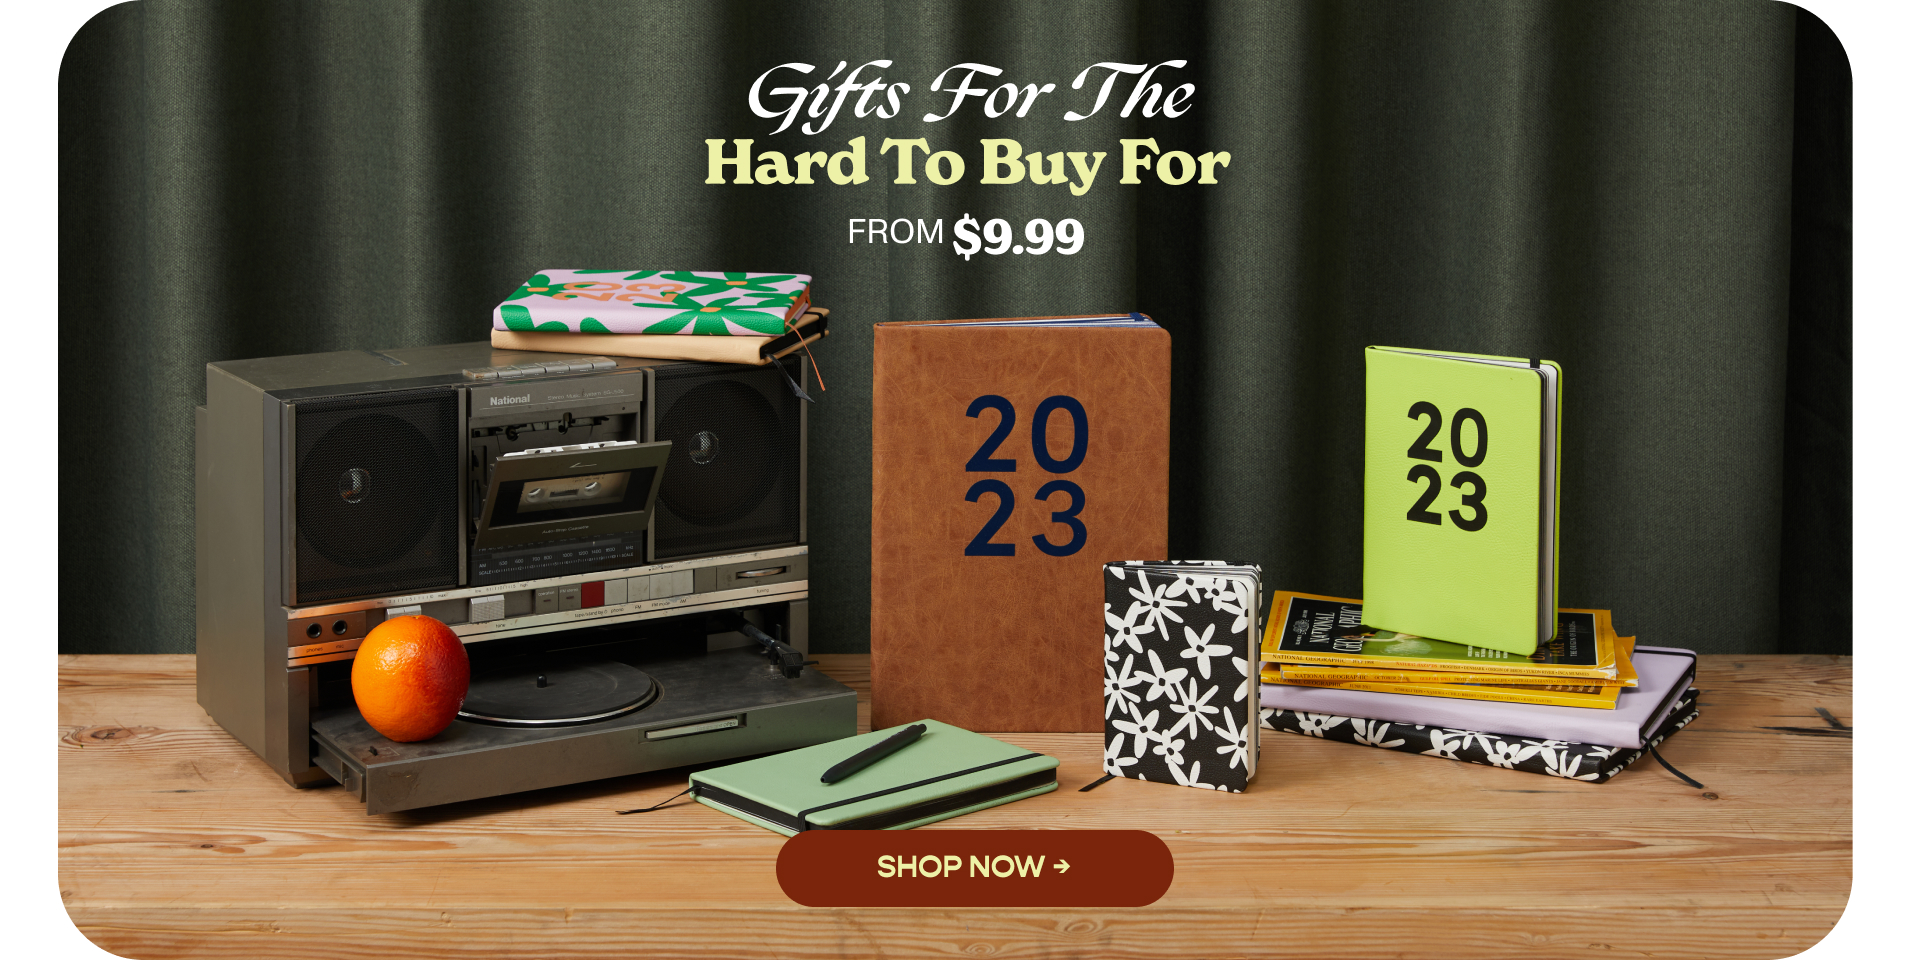 Gifts For The Hard To Buy For. From $9.99. Shop Now.